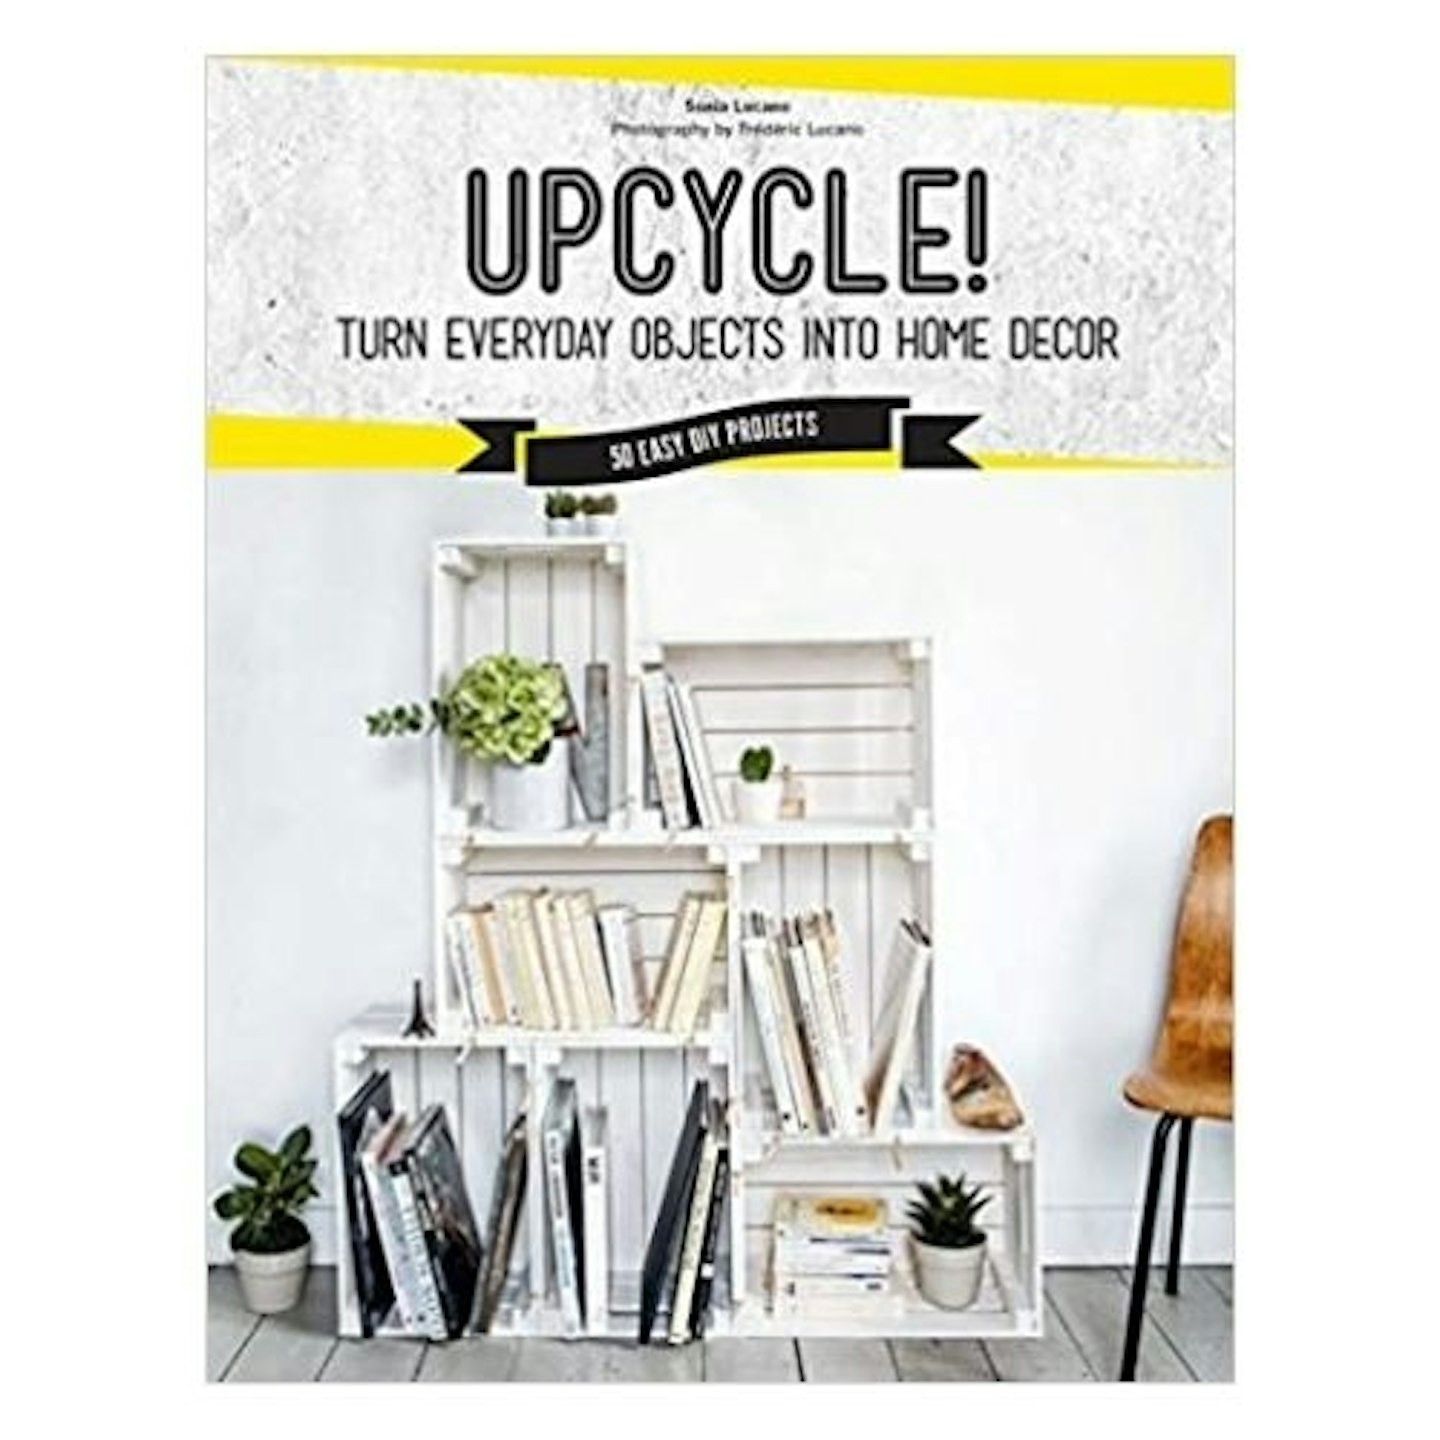 Upcycle!: DIY Furniture and Decor from Unexpected Objects by  Sonia Lucano